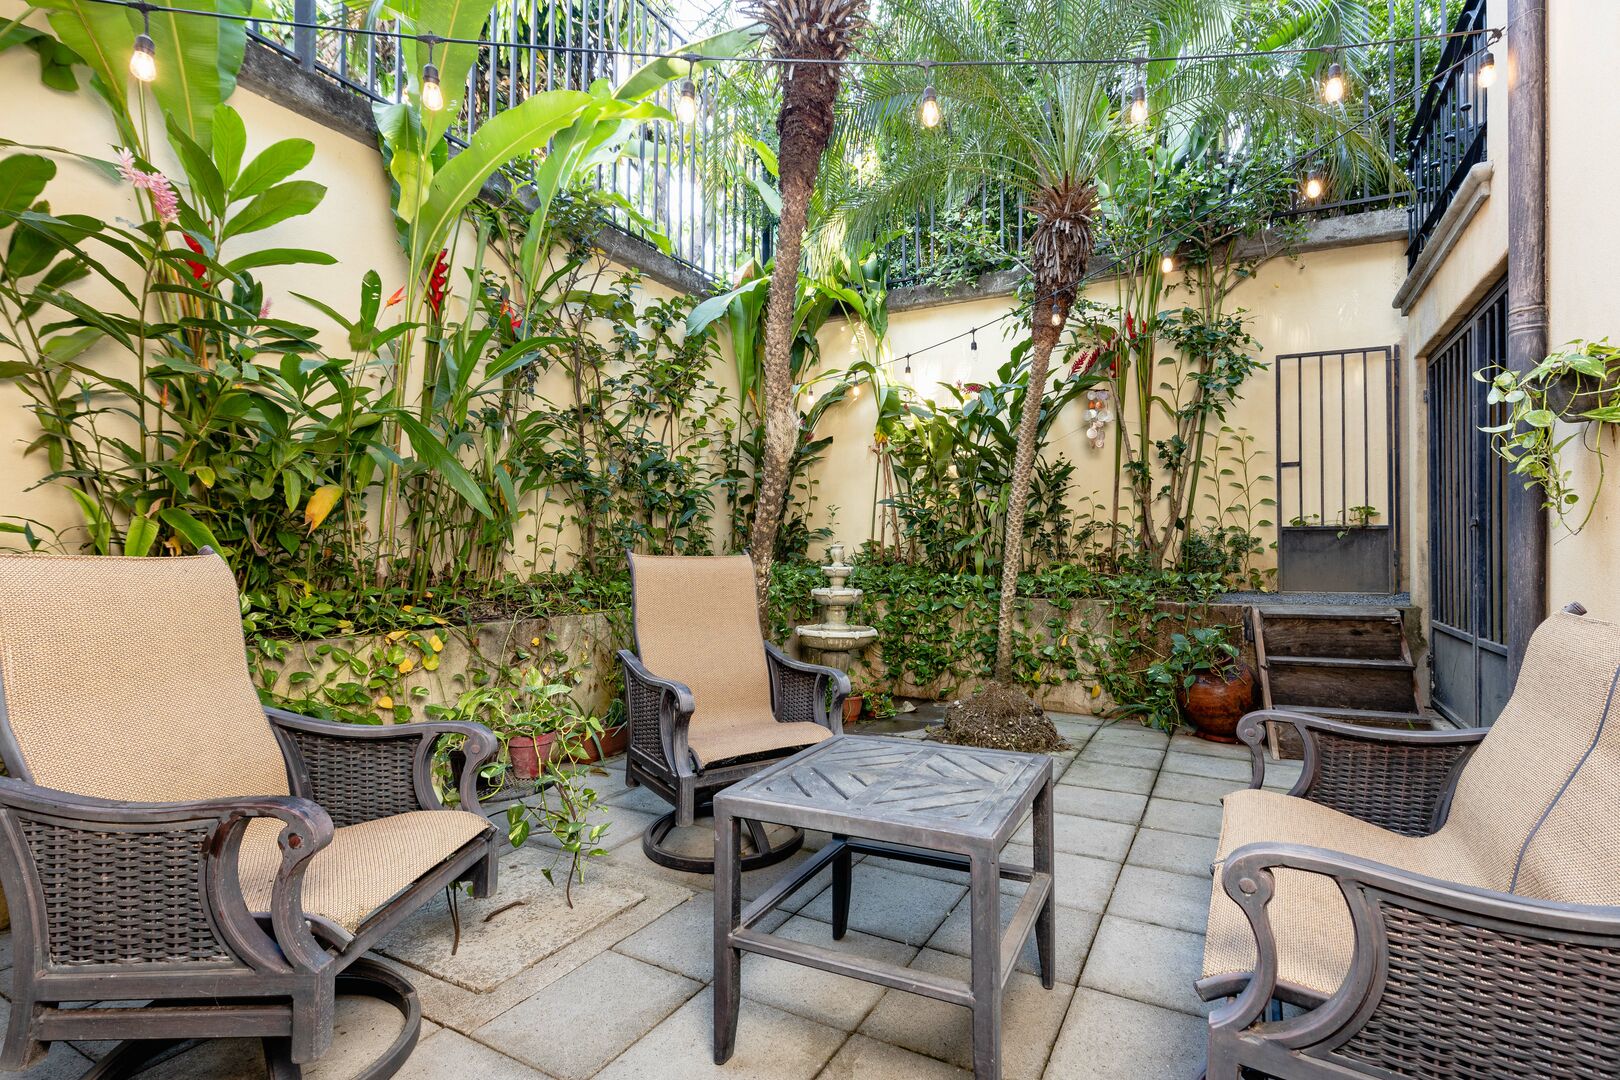 Escape to the kitchen's private garden patio for moments of peaceful solitude amidst lush surroundings.